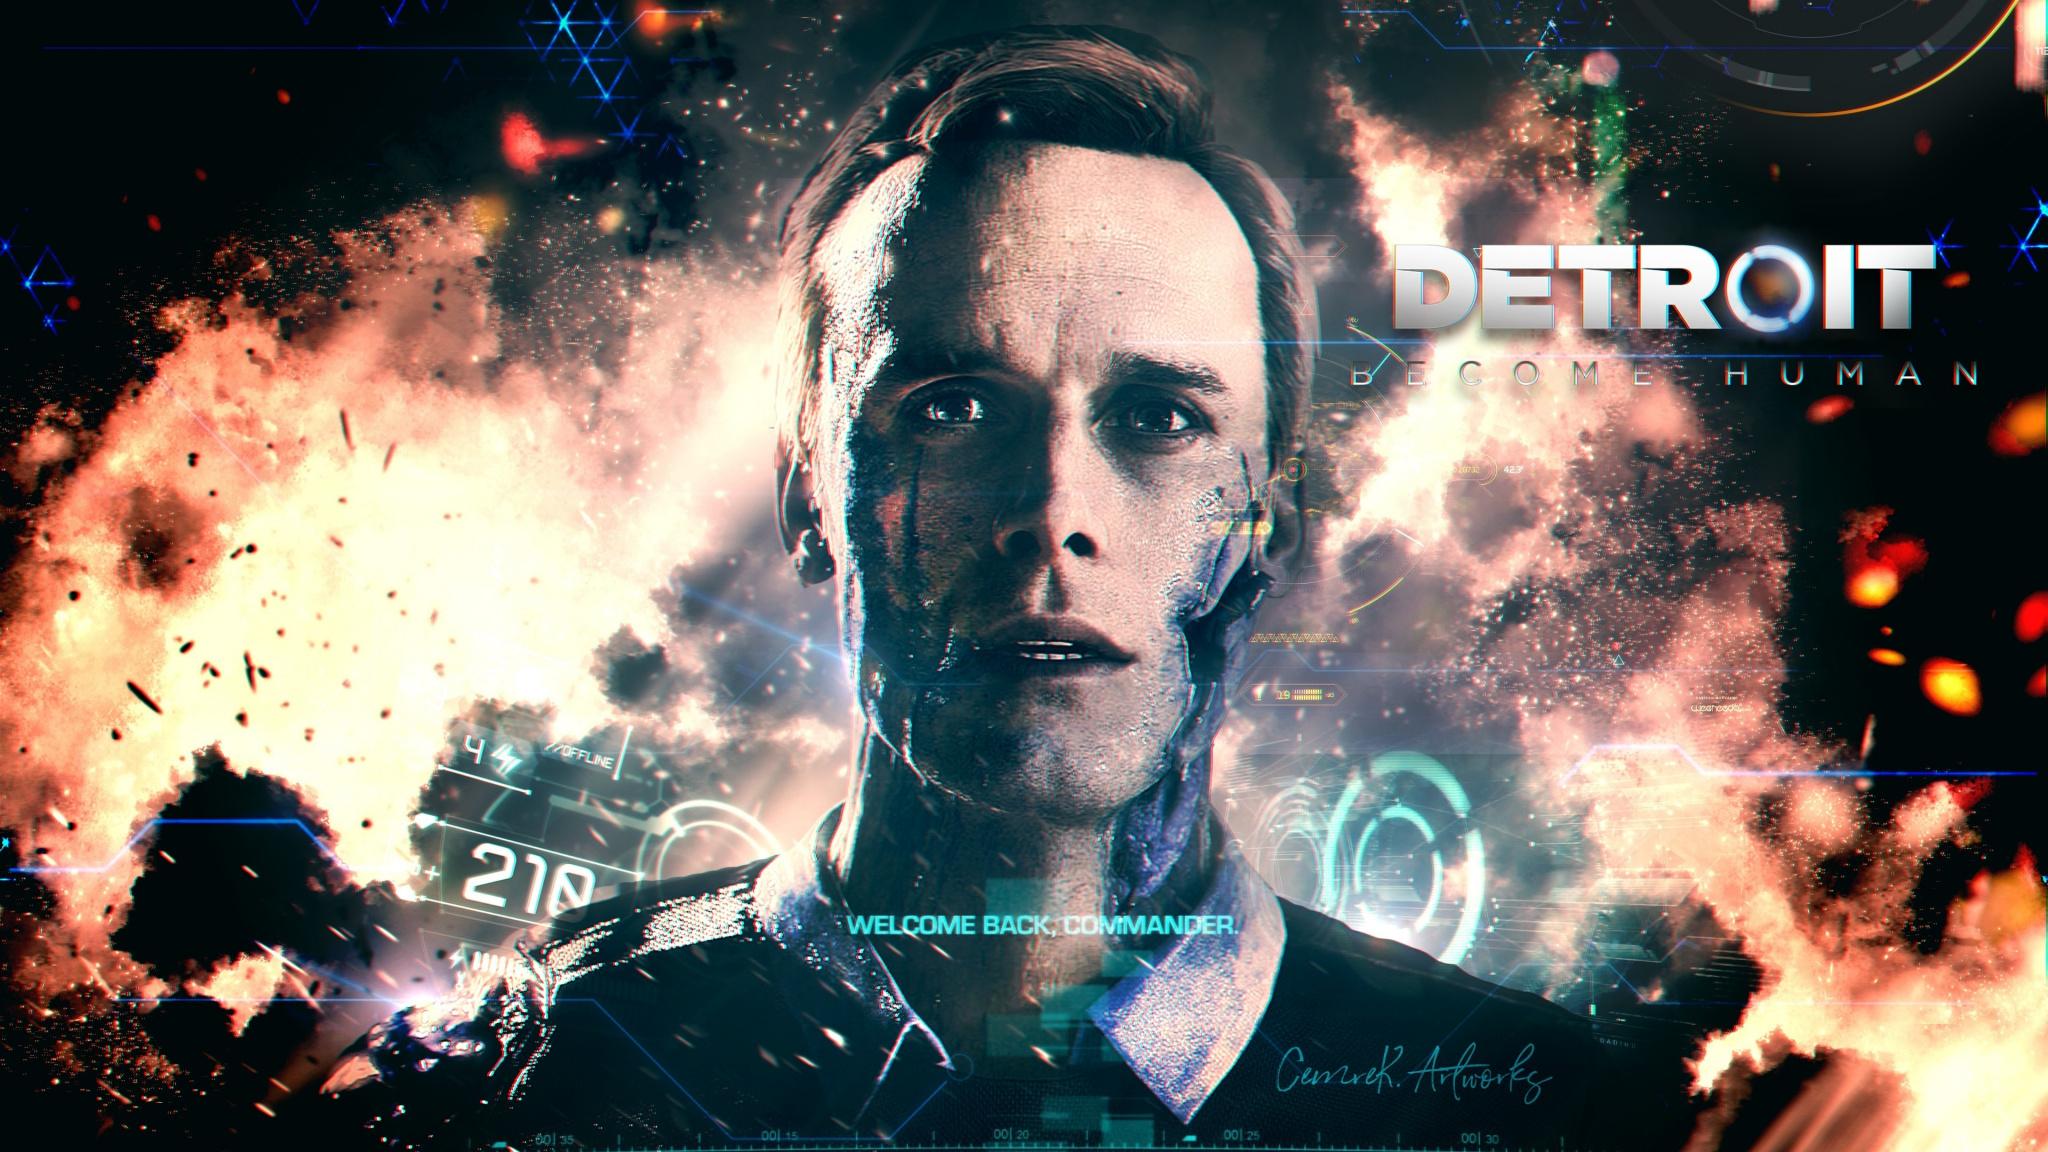 Download 2048x1152 wallpaper detroit: become human, video game, 2018